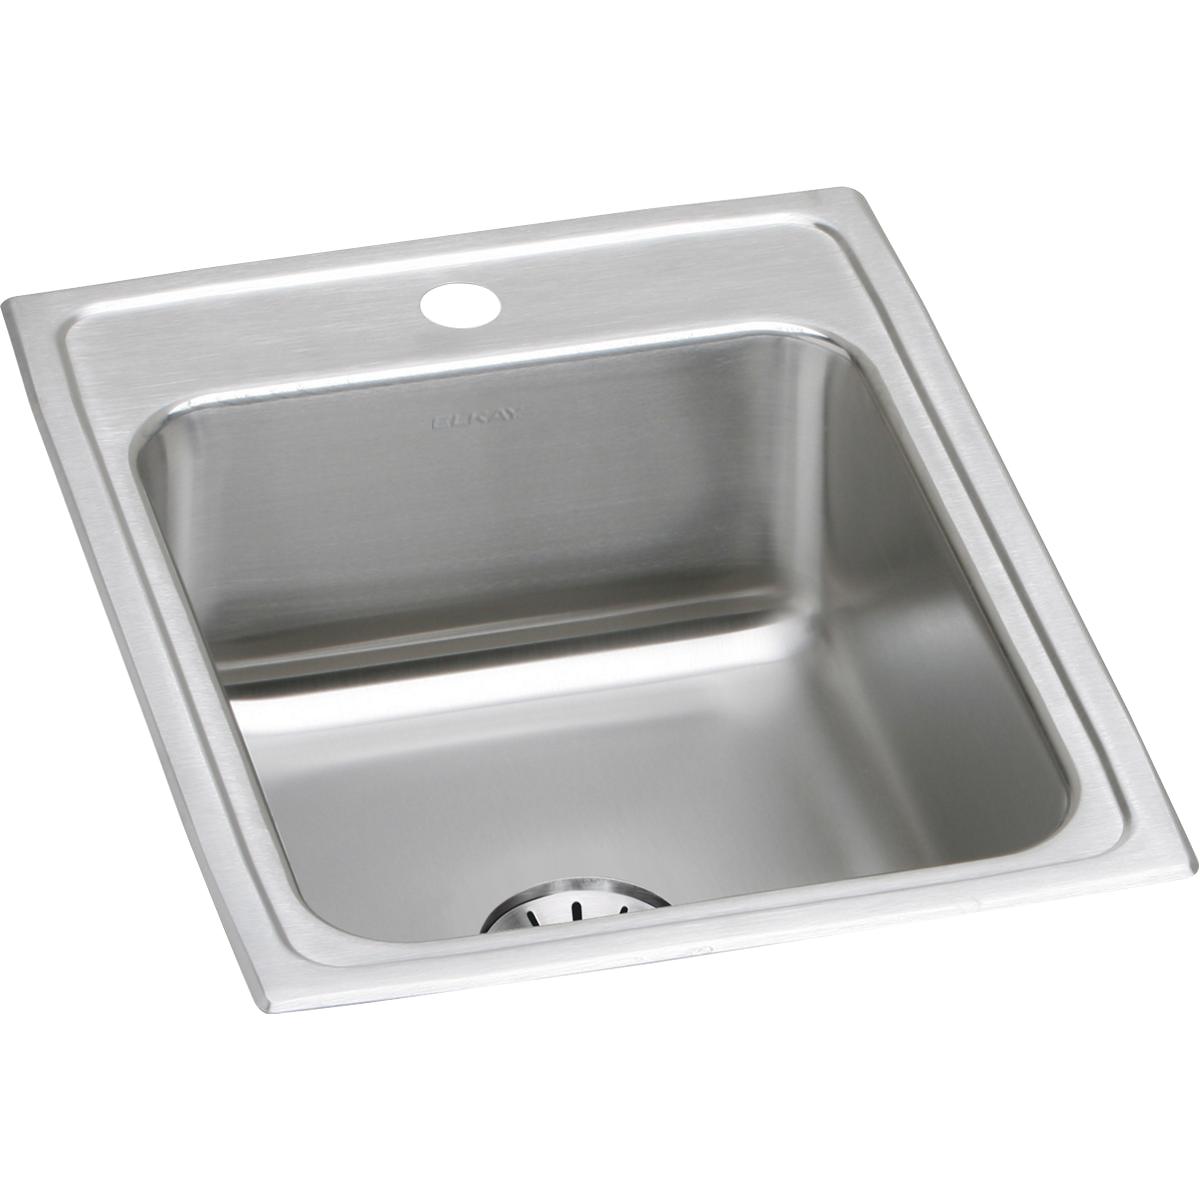 Elkay Lustertone Classic 17" x 22" x 7-5/8" Single Bowl Drop-in Sink with Perfect Drain